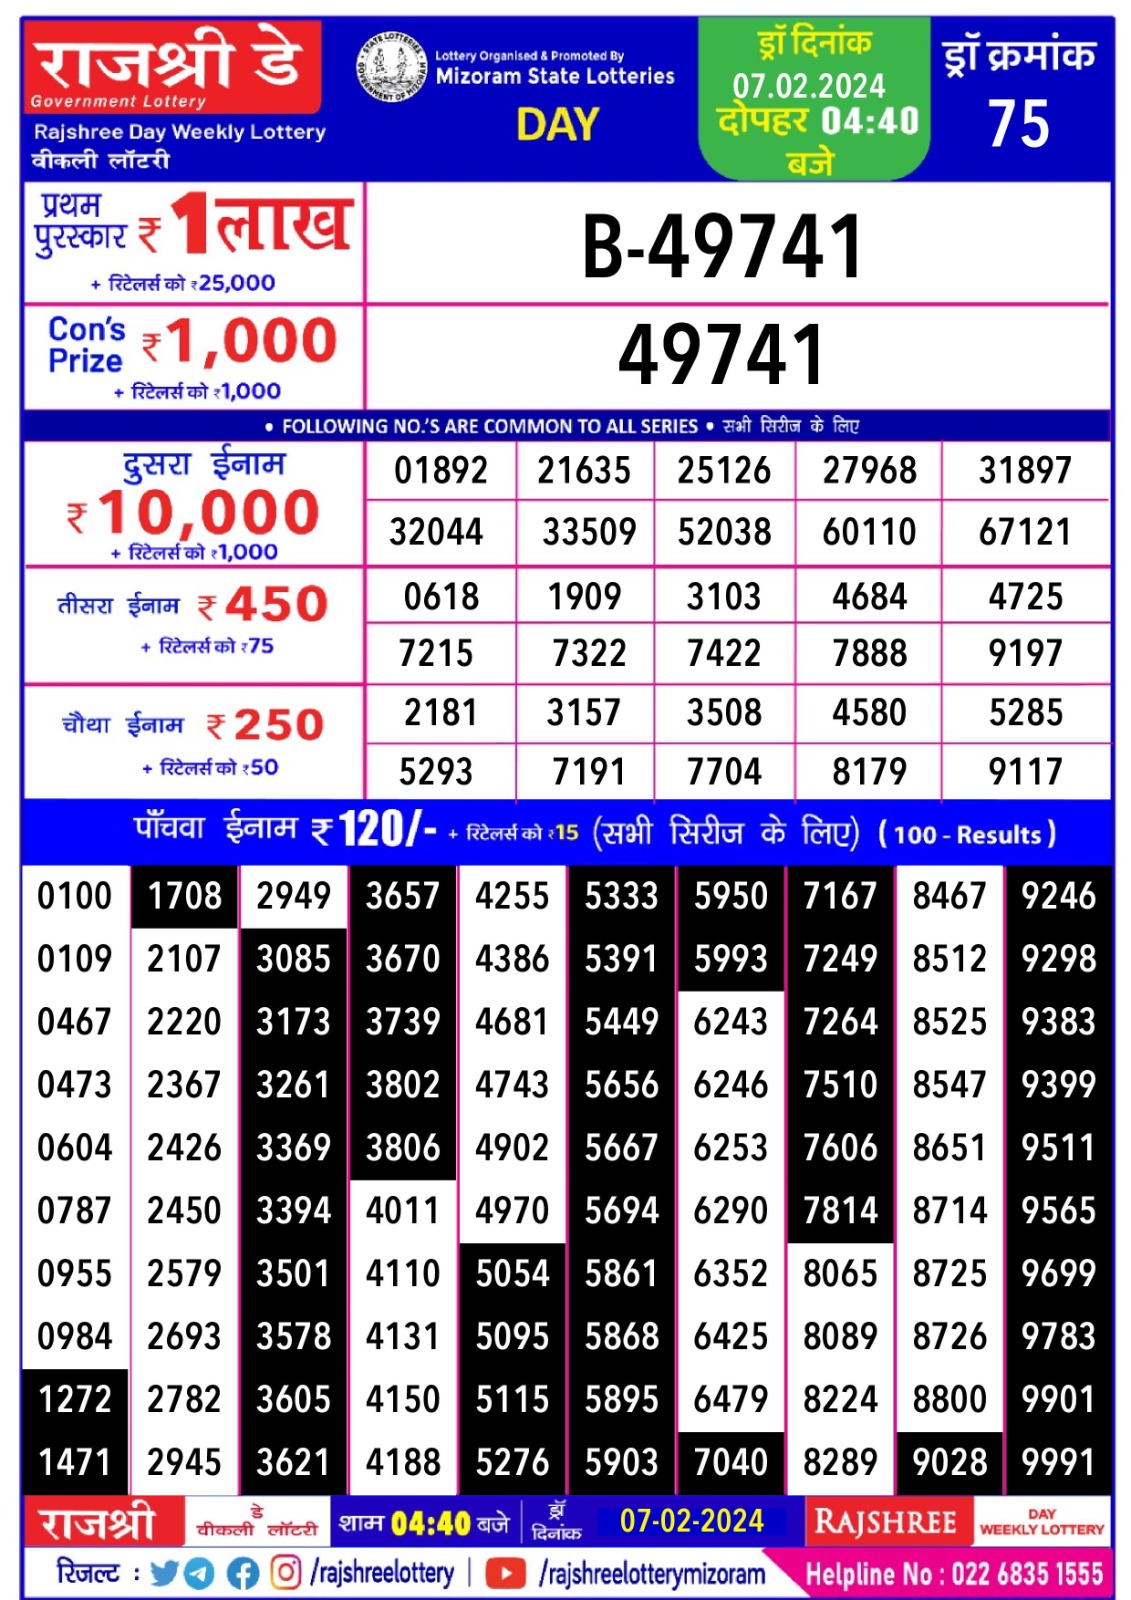 Rajshree 4.40pm daily lottery result 7th feb 2024 All Lottery Result